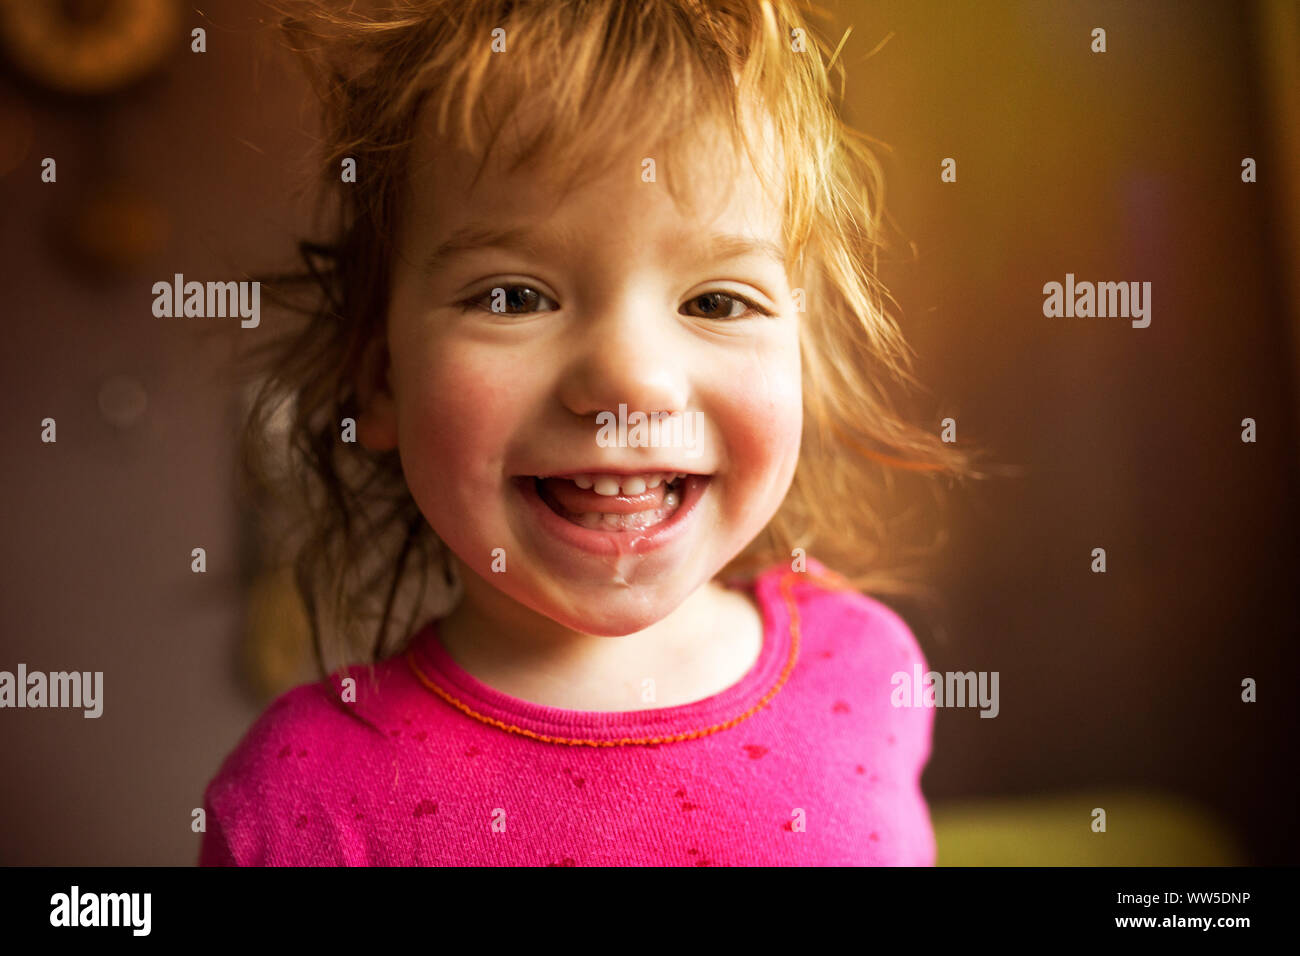 1-2 year old child with red shirt looking happily in the camera Stock Photo